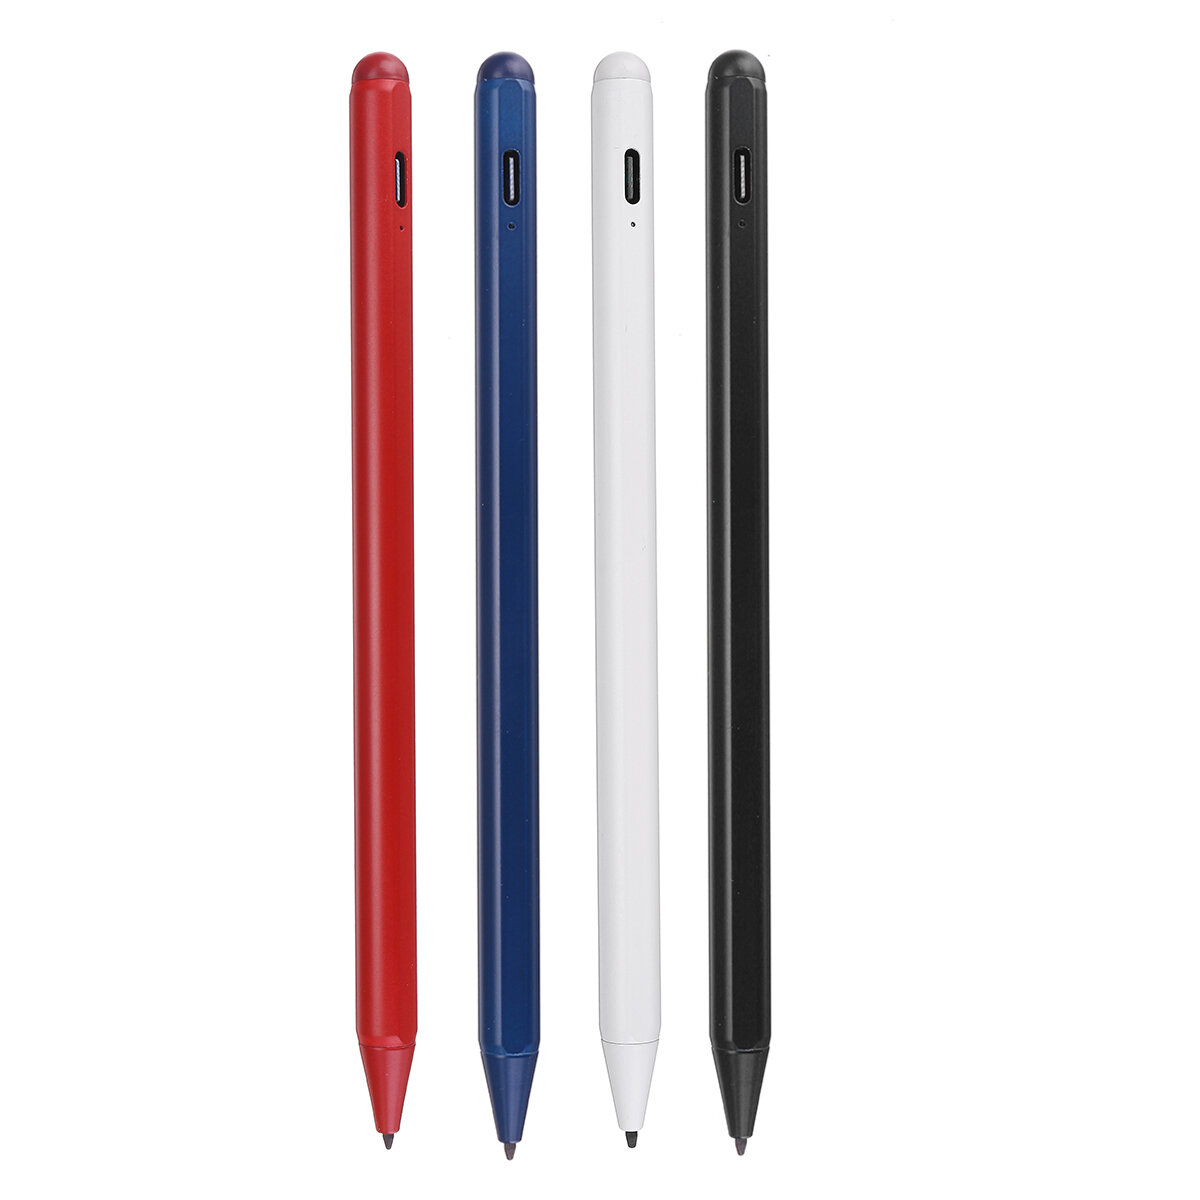 

Palm Rejection Active Capacitive High Precision Touch Screen Stylus Pen Specially Designed for iPad